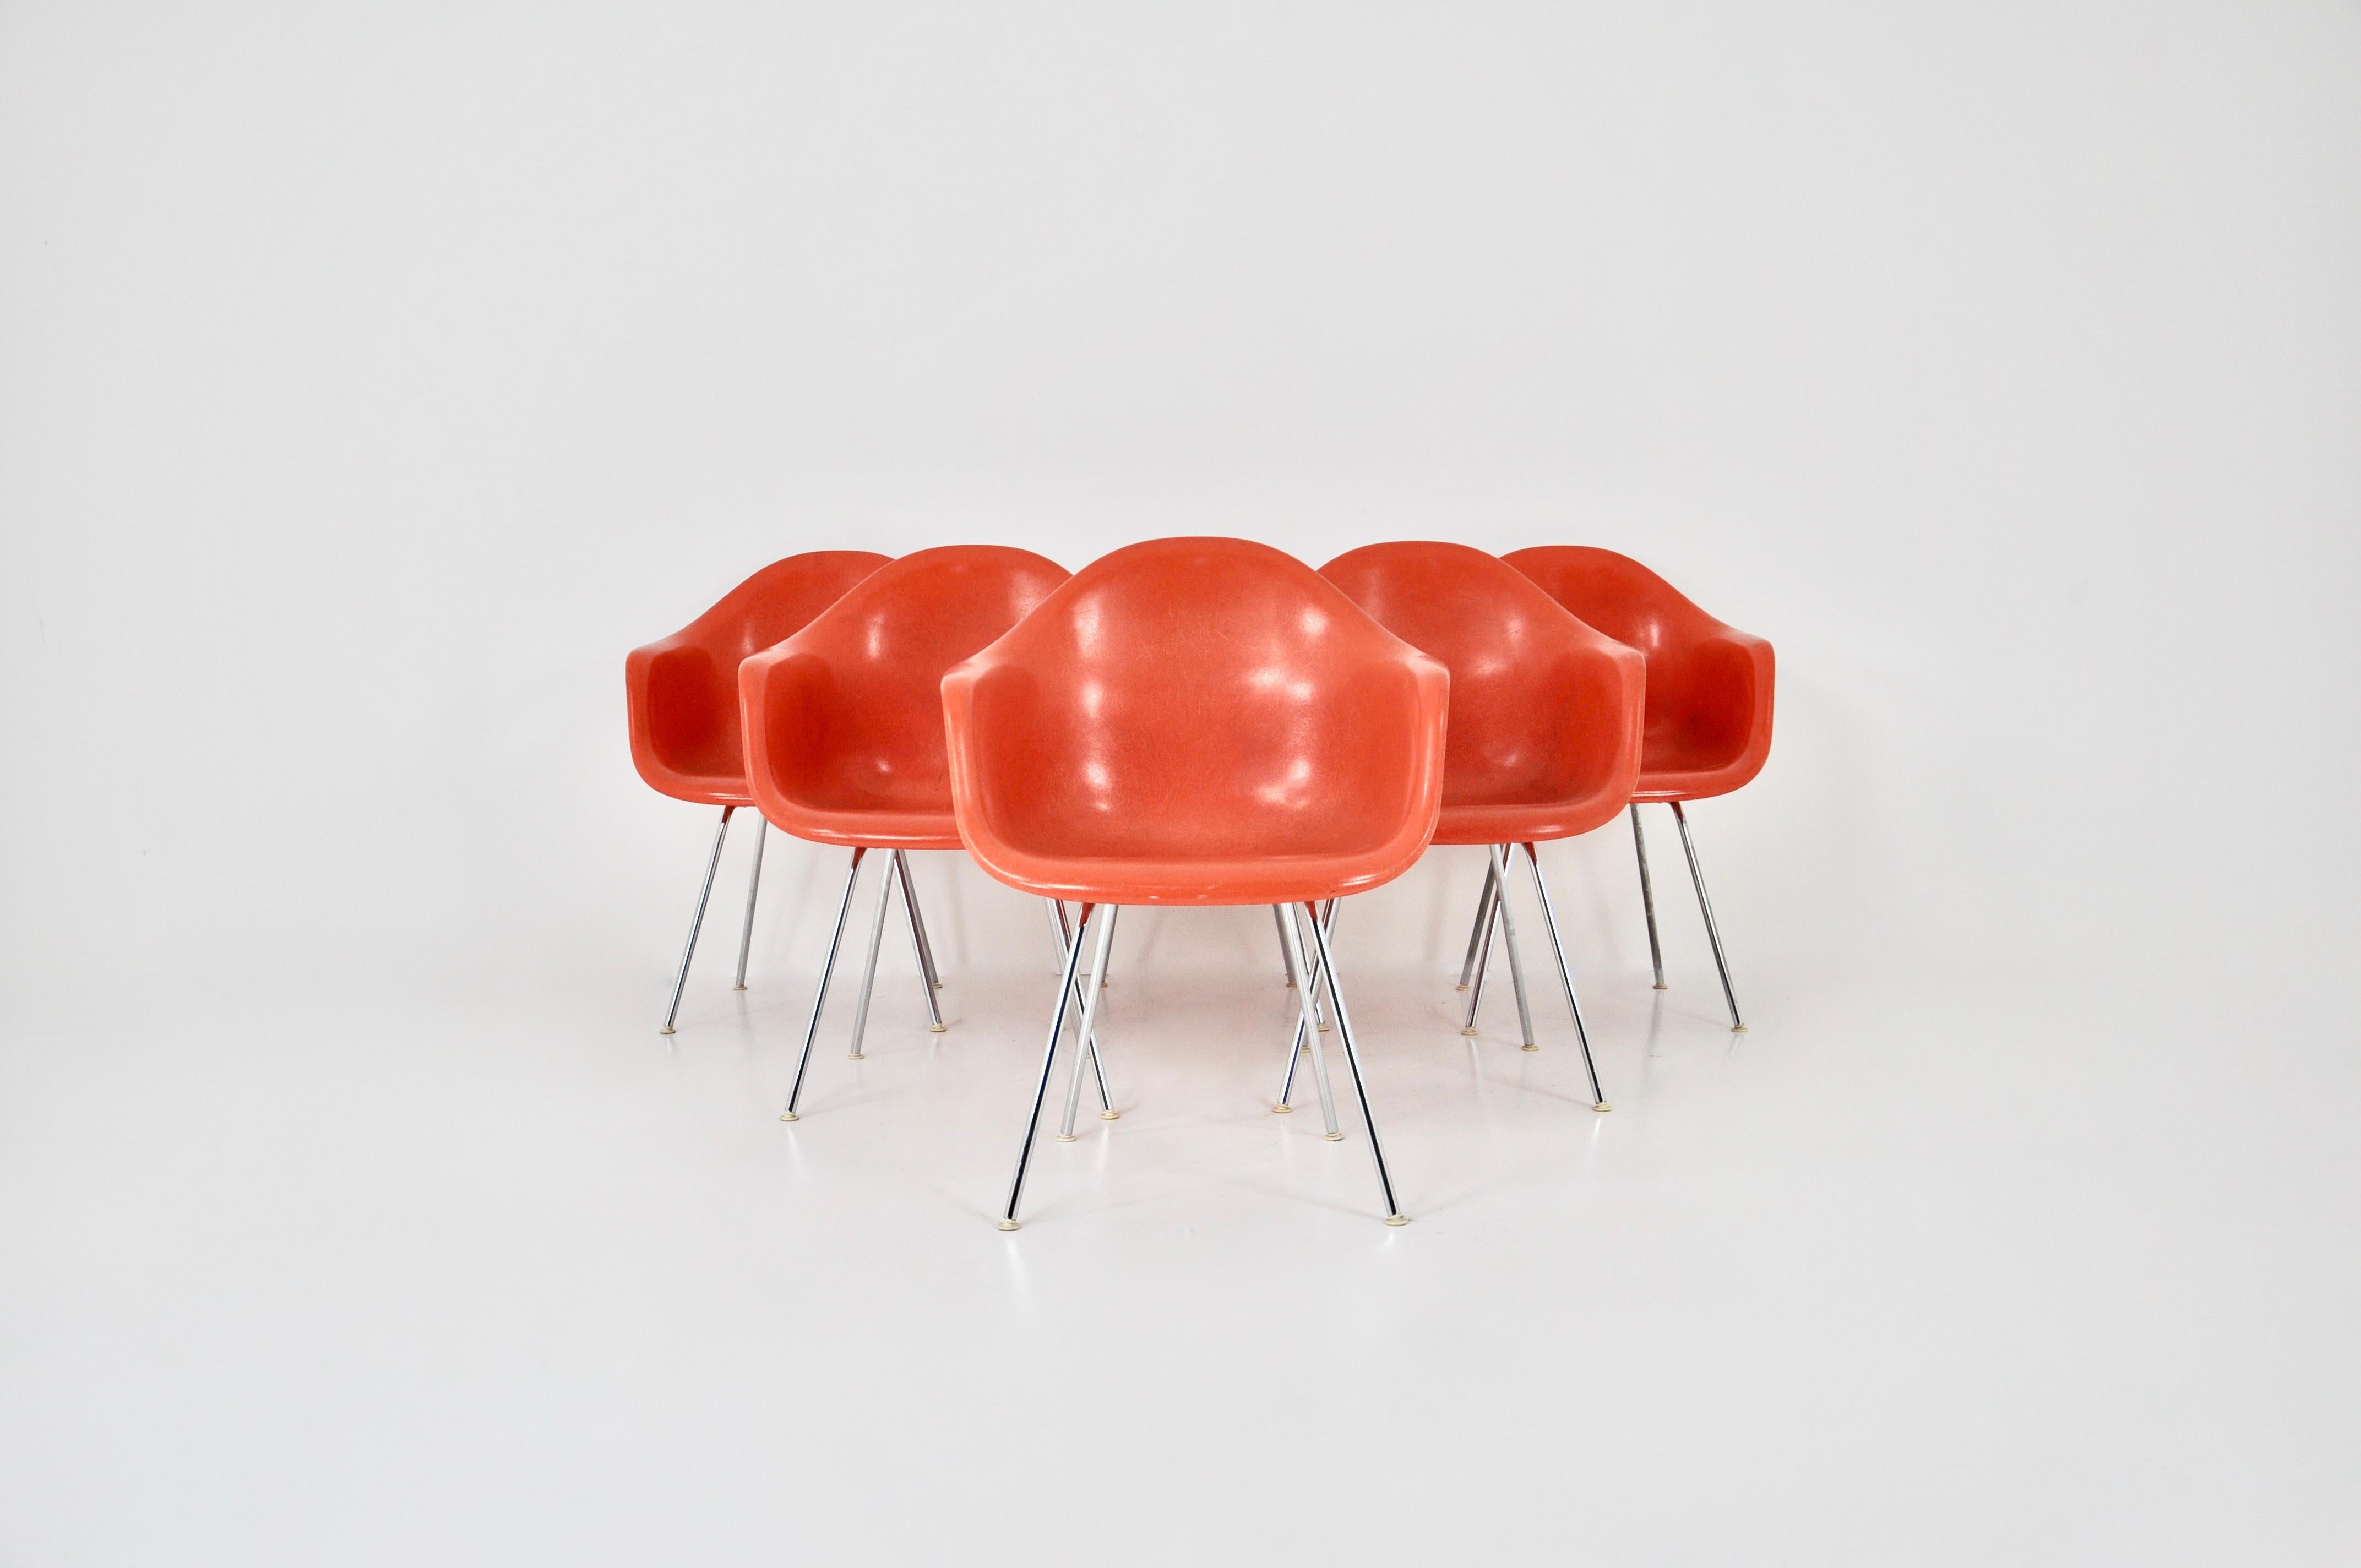 Set of 6 fiberglass chairs in orange color with chrome metal legs. Stamped H by Herman Miller on the bottom. Wear due to time and age of chairs. Seat height: 43cm.